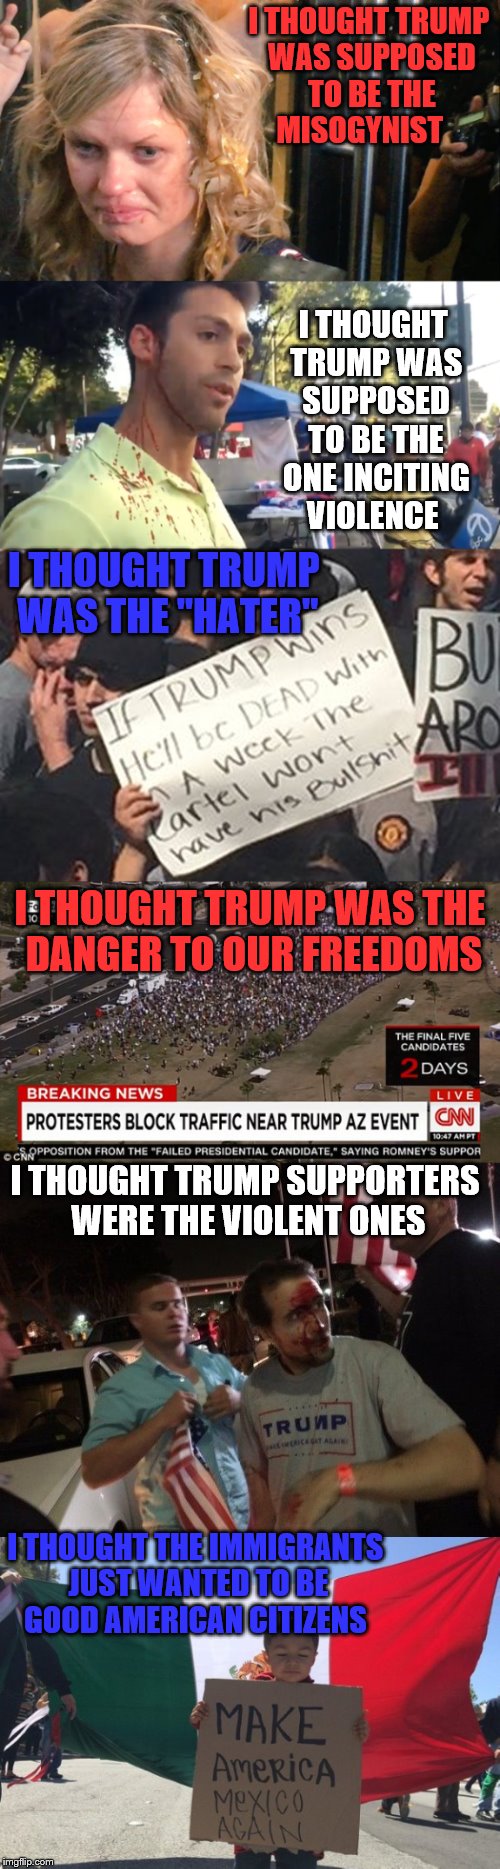 It looks to me like the protestors are the brown shirts.  | I THOUGHT TRUMP WAS SUPPOSED TO BE THE  MISOGYNIST; I THOUGHT TRUMP WAS SUPPOSED TO BE THE ONE INCITING VIOLENCE; I THOUGHT TRUMP WAS THE "HATER"; I THOUGHT TRUMP WAS THE DANGER TO OUR FREEDOMS; I THOUGHT TRUMP SUPPORTERS WERE THE VIOLENT ONES; I THOUGHT THE IMMIGRANTS JUST WANTED TO BE GOOD AMERICAN CITIZENS | image tagged in memes,trump protestors | made w/ Imgflip meme maker